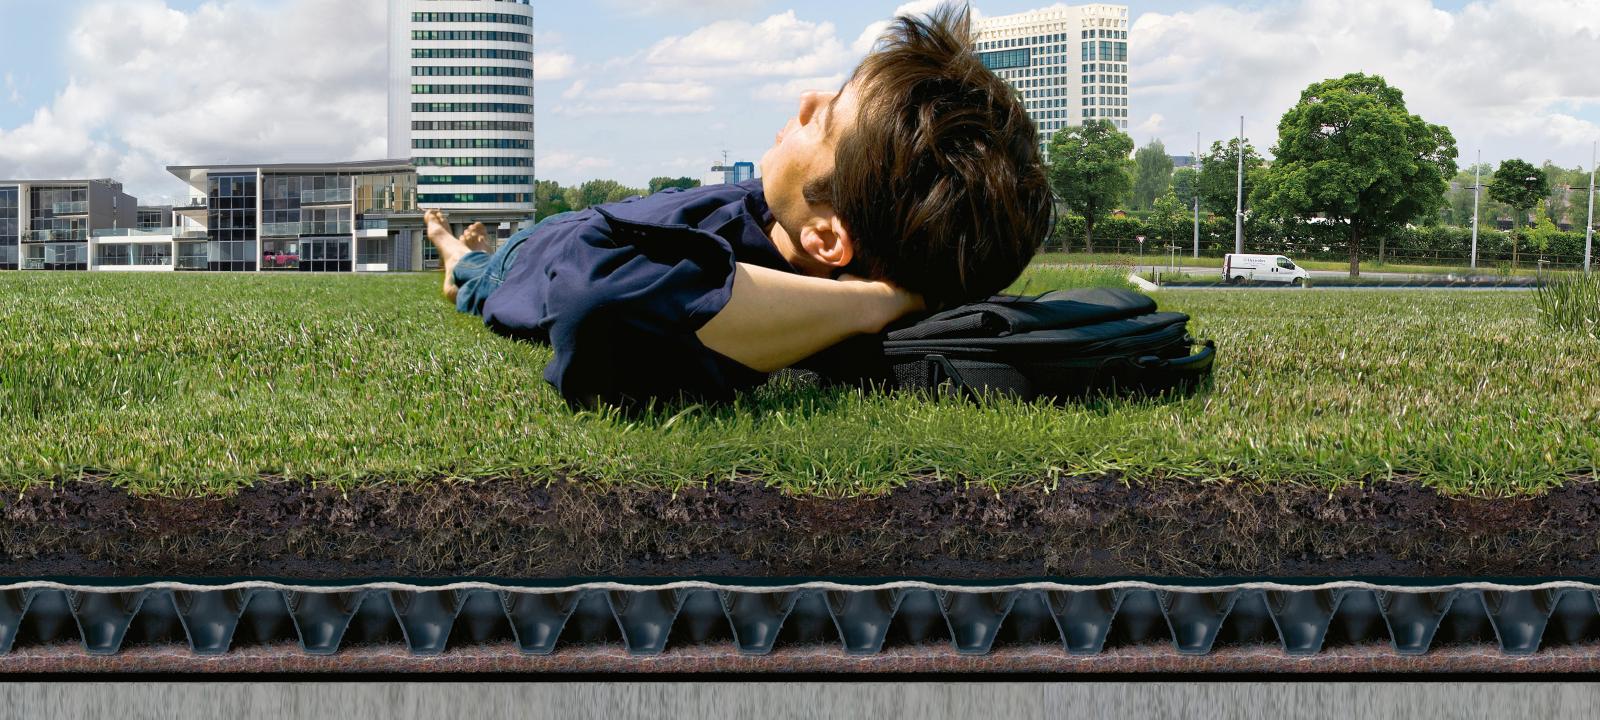 Man relaxing on a lawn established on a green roof system build-up